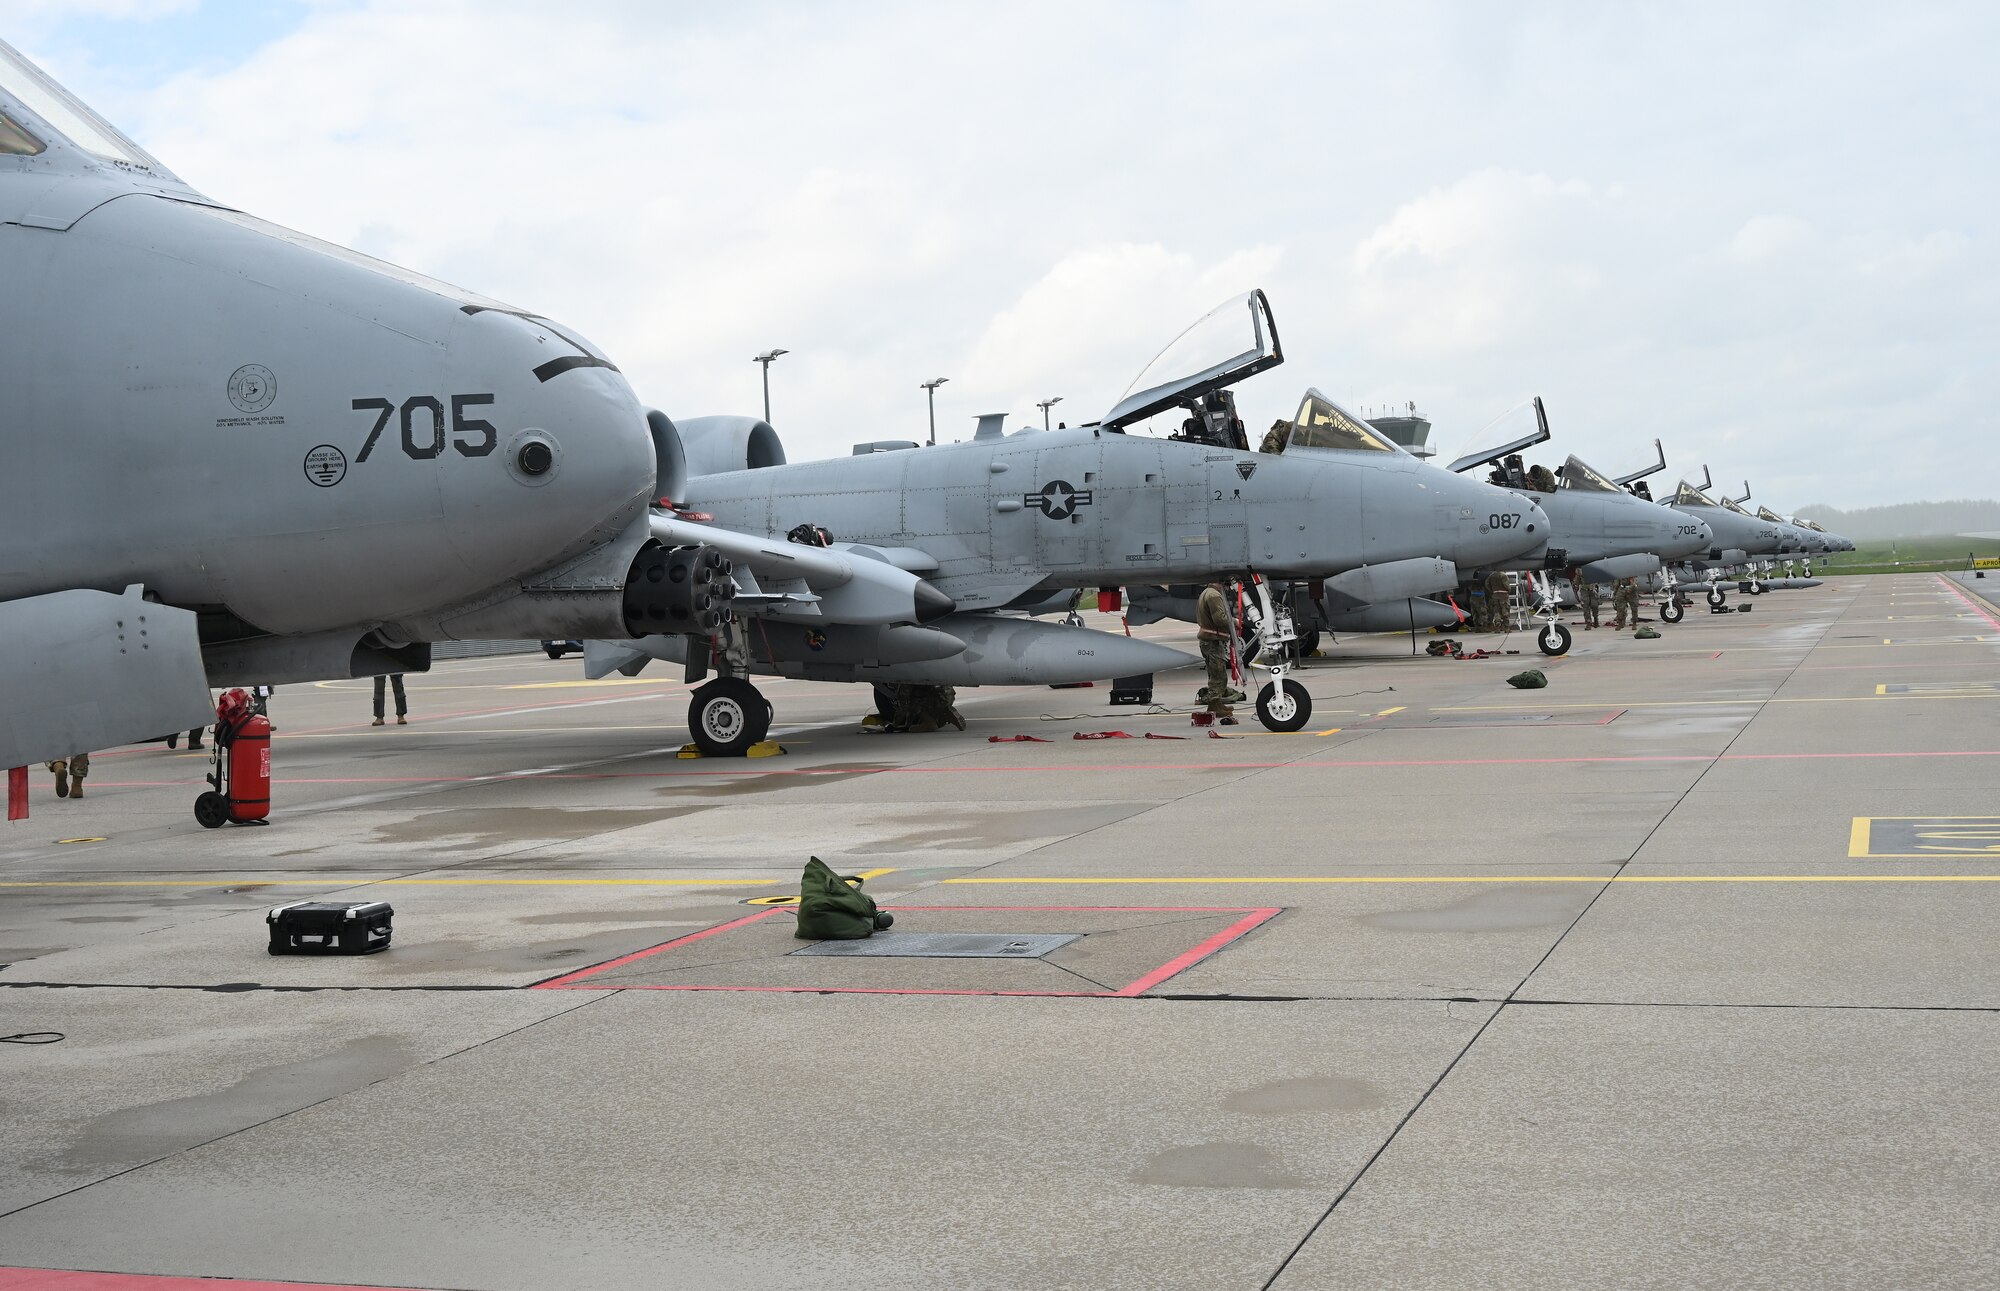 Nine A-10C Thunderbolt II aircraft assigned to the 104th Fighter Squadron, Maryland Air National Guard, sit on the flightline at Lielvārde Air Base in the Vidzeme region of Latvia, May 14, 2022, for Agile Combat Employment training during Defender Europe 22. The exercise demonstrates U.S. Army Europe and Africa's ability to conduct large-scale ground combat operations across multiple theatres in support of NATO and the National Defense Strategy.